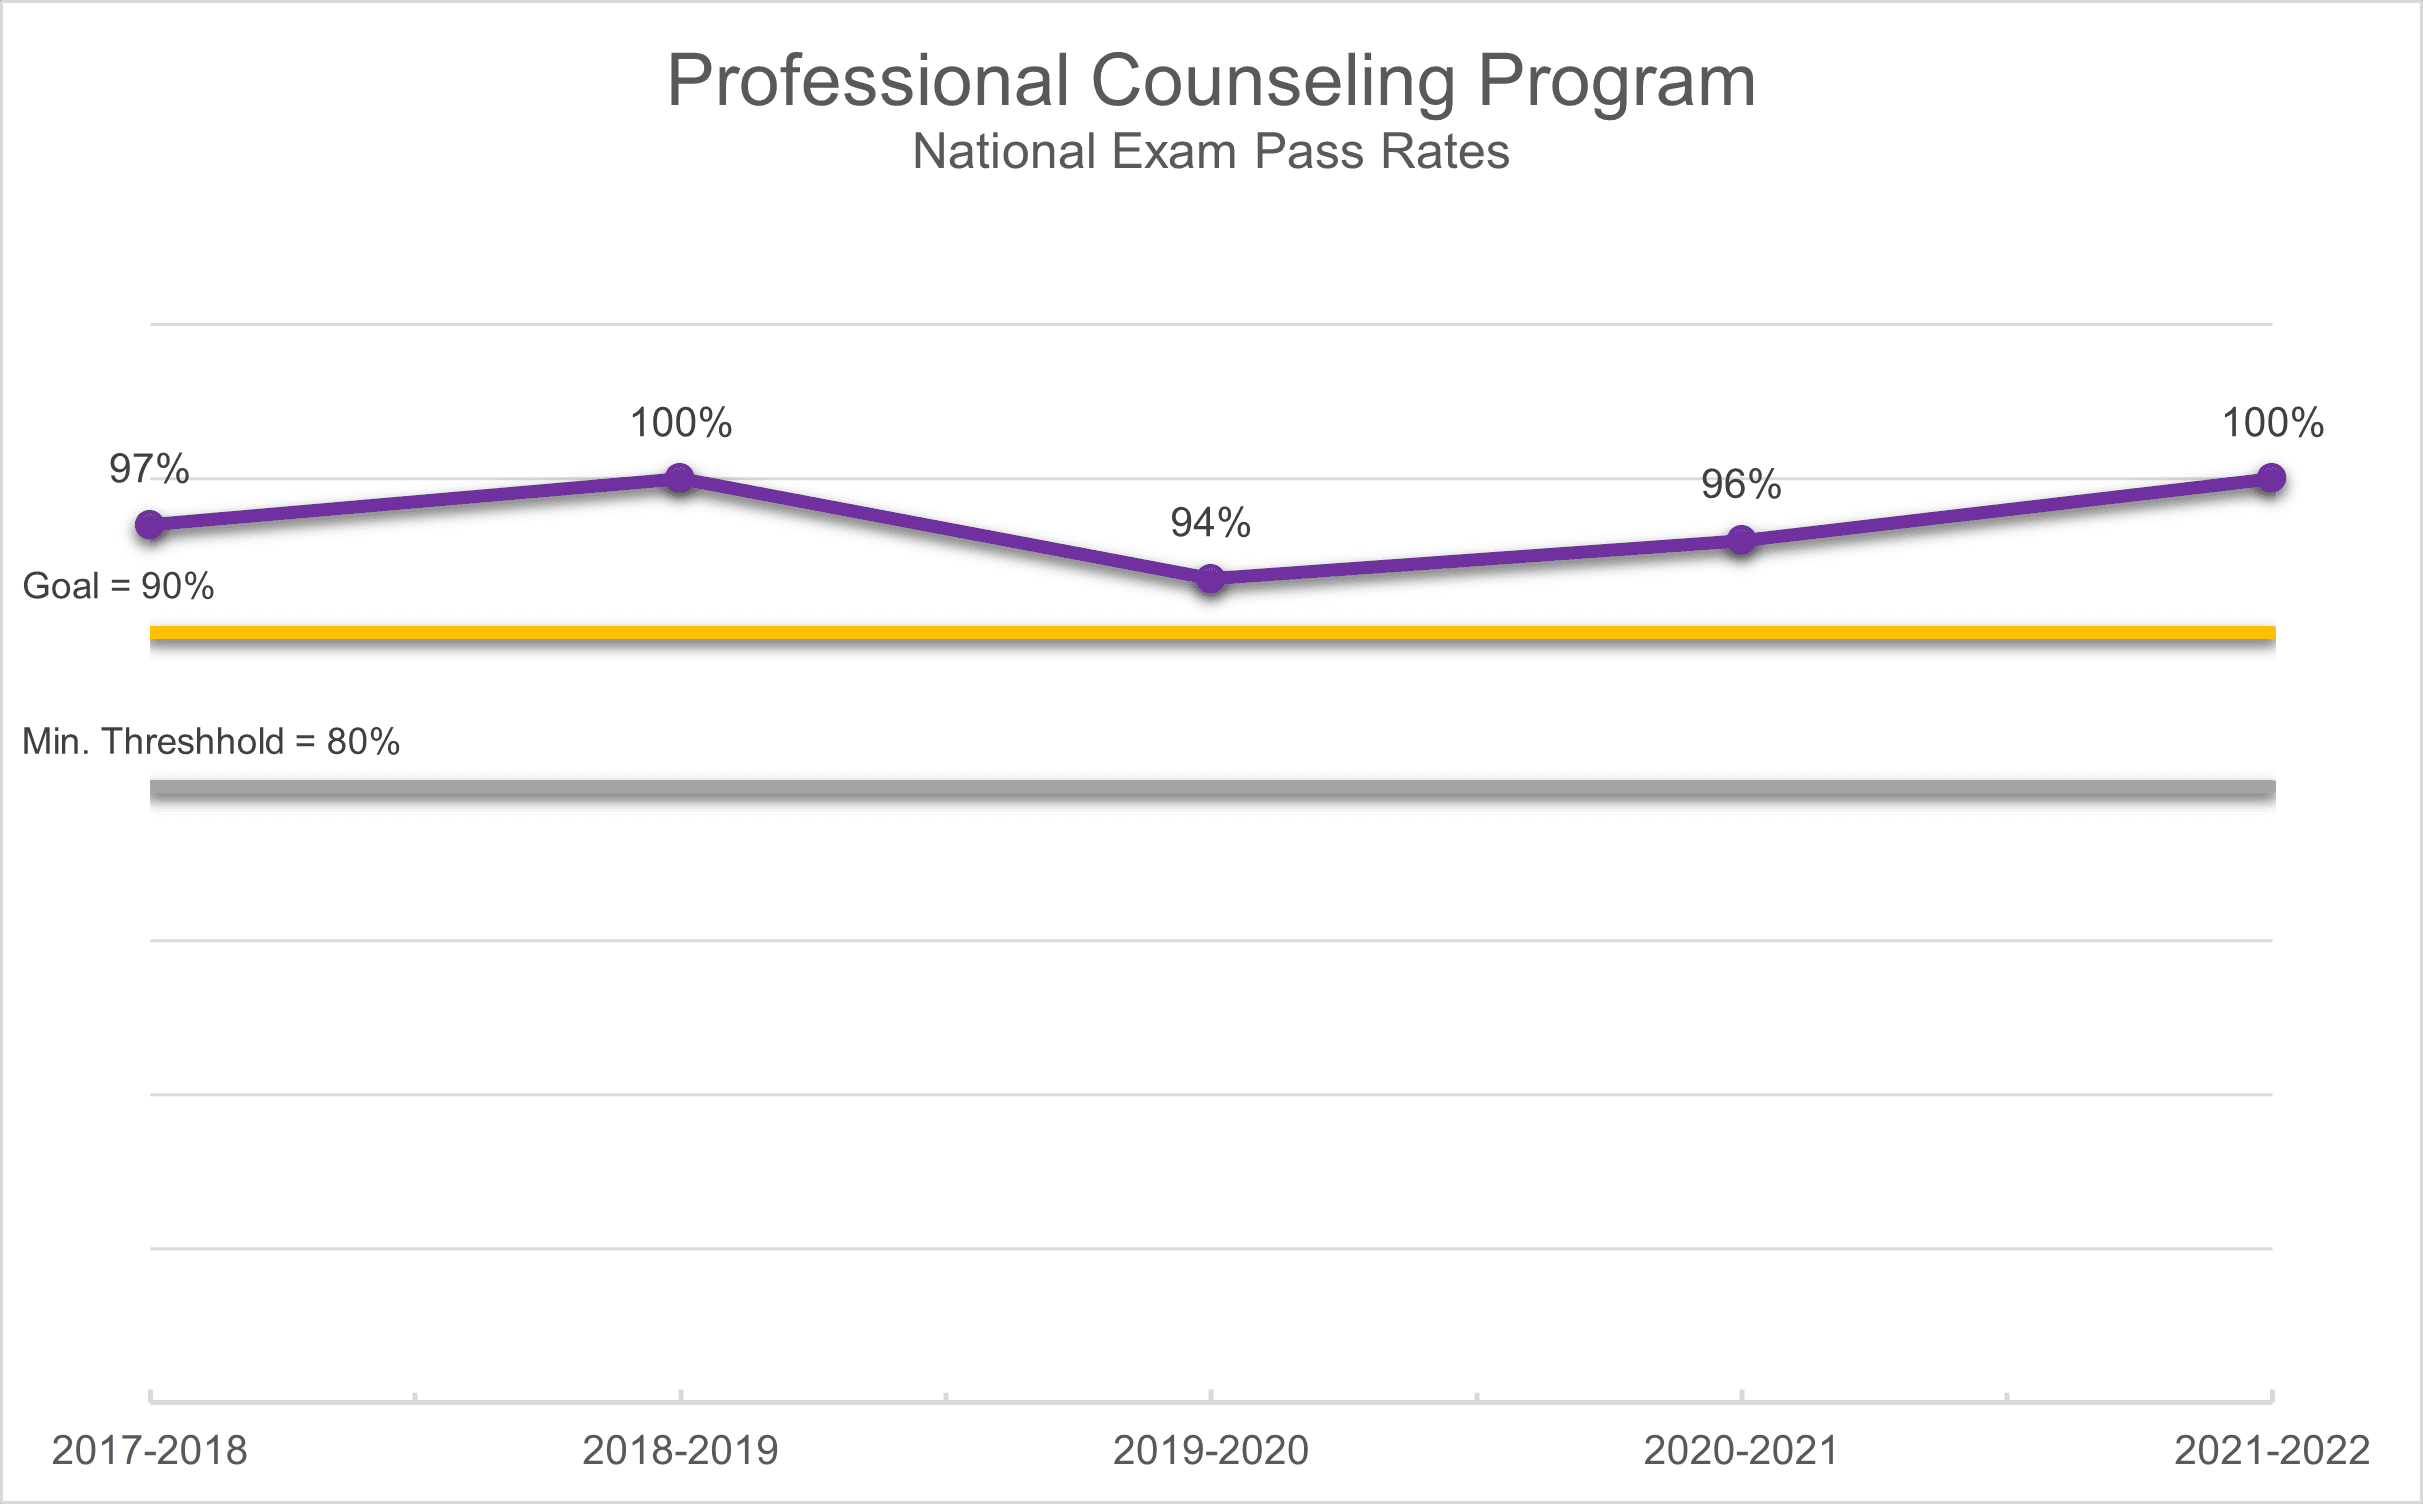 Professional Counseling Program National Exam Pass Rates